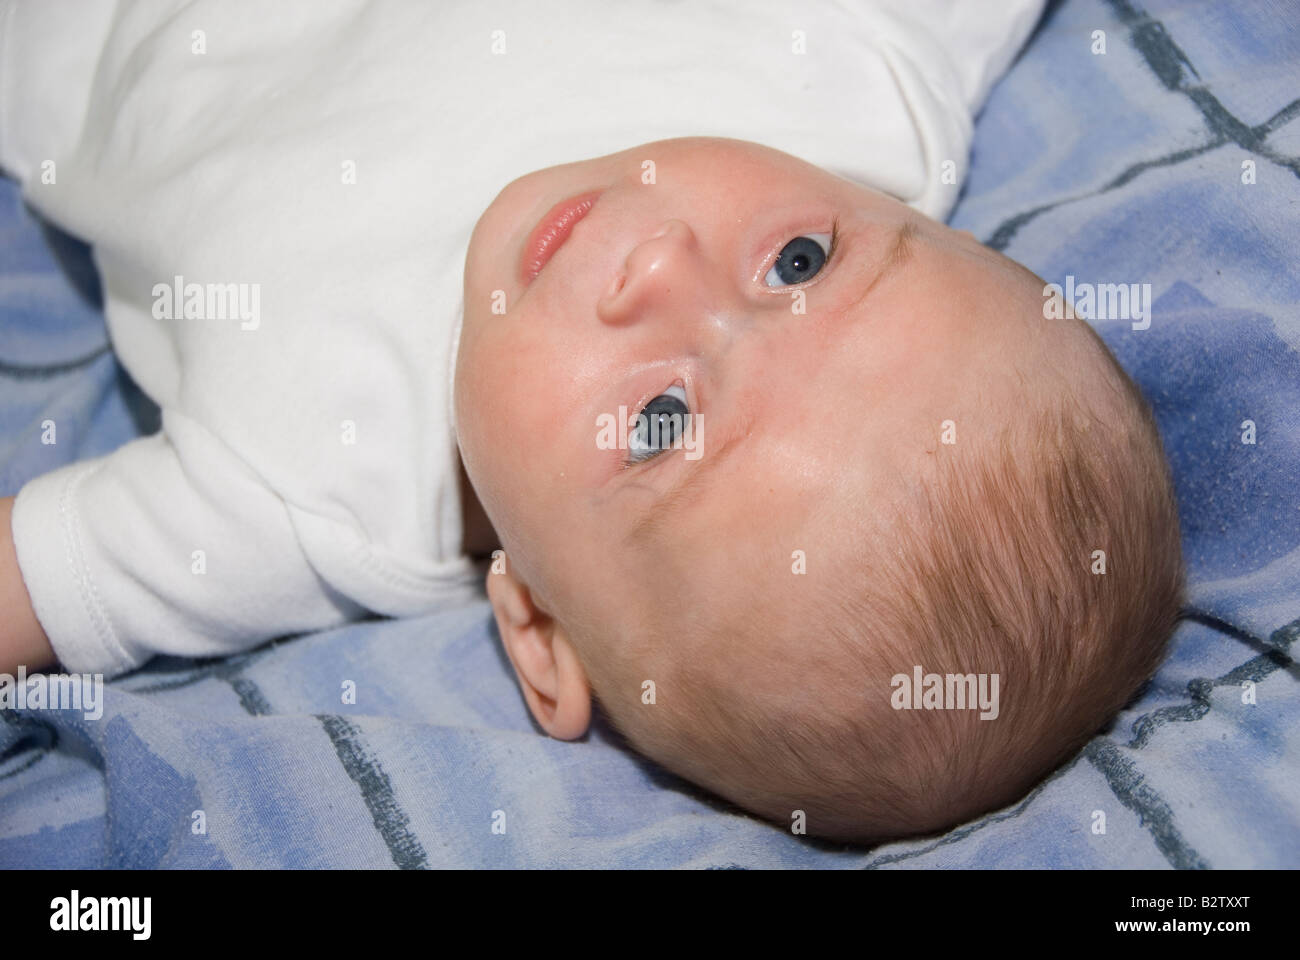 Baby Boy Joshua Kailas Hudson Aged 15 Weeks Lying on a Blue Bed Cover Looking Up Behind Stock Photo